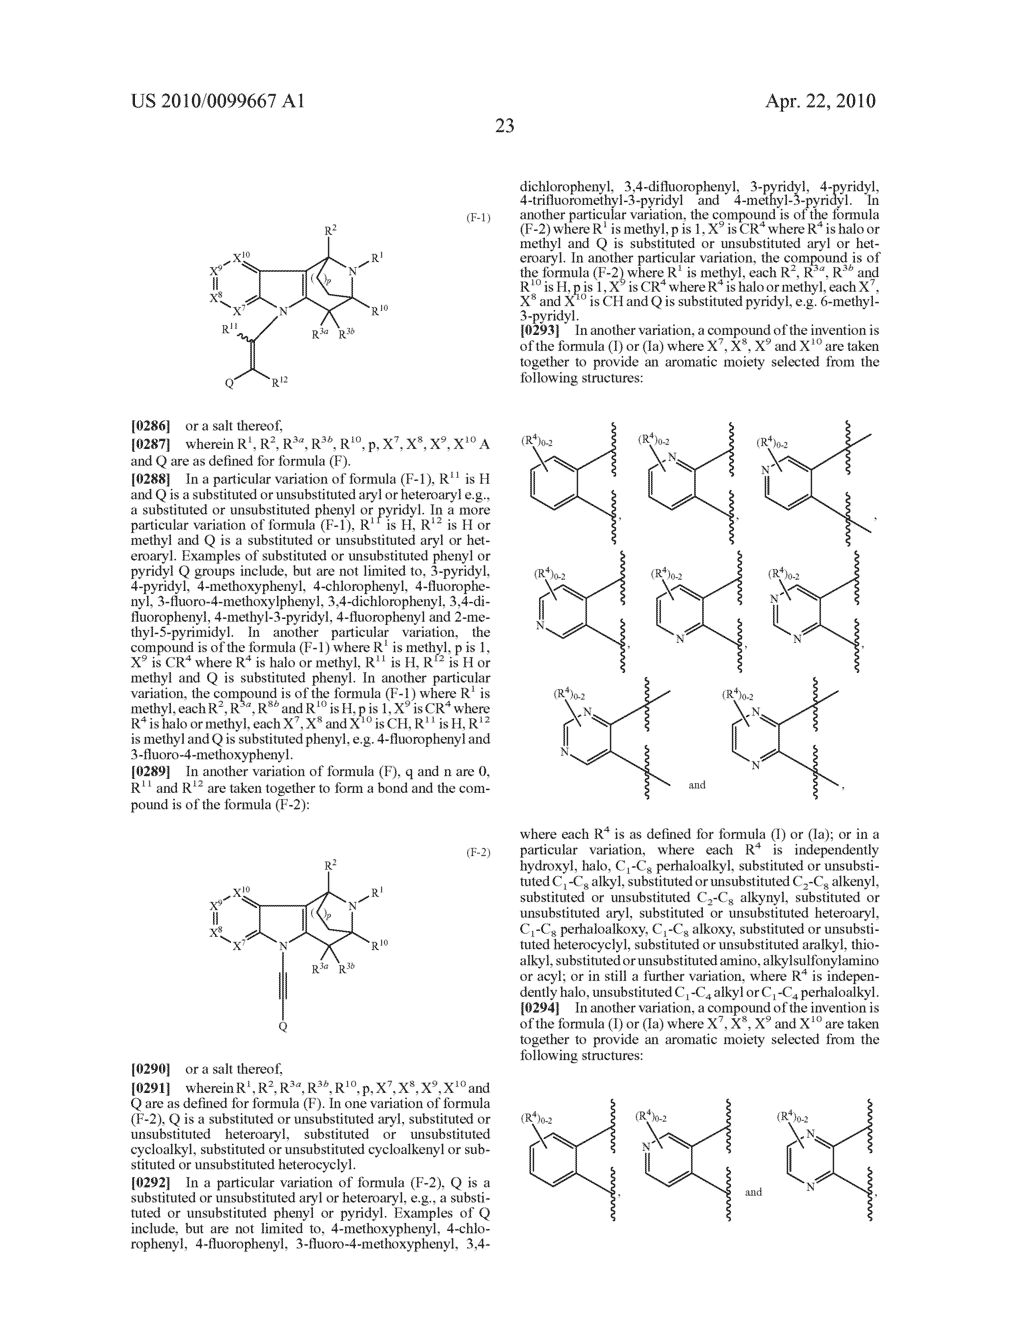 BRIDGED HETEROCYCLIC COMPOUNDS AND METHODS OF USE - diagram, schematic, and image 24